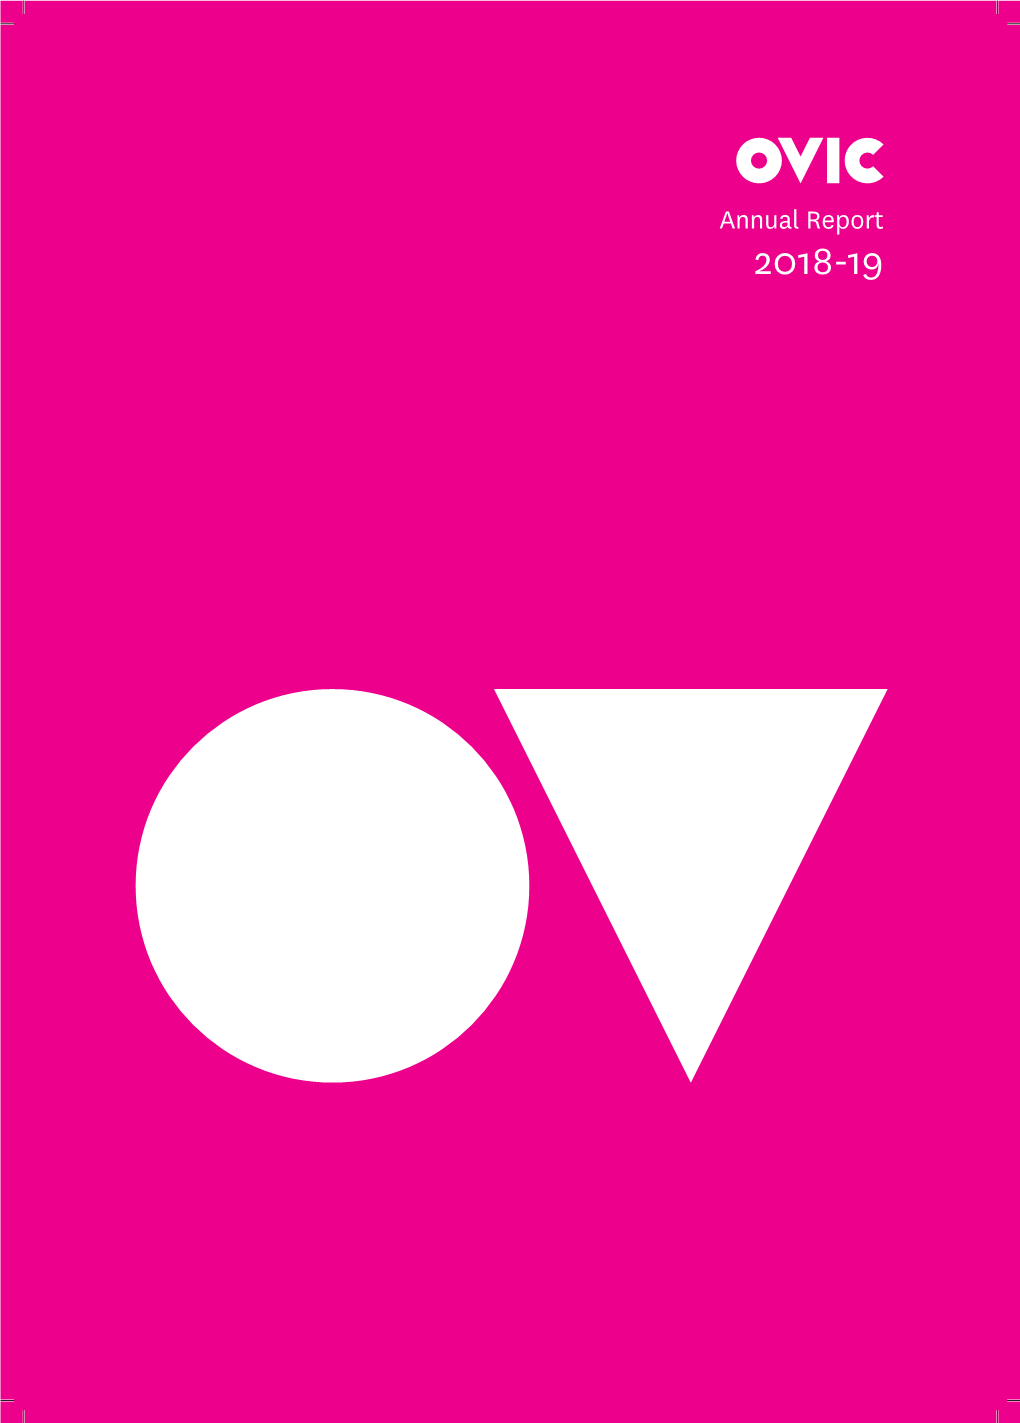 Annual Report 2018-19 Authorised by the OFFICE of the VICTORIAN INFORMATION COMMISSIONER